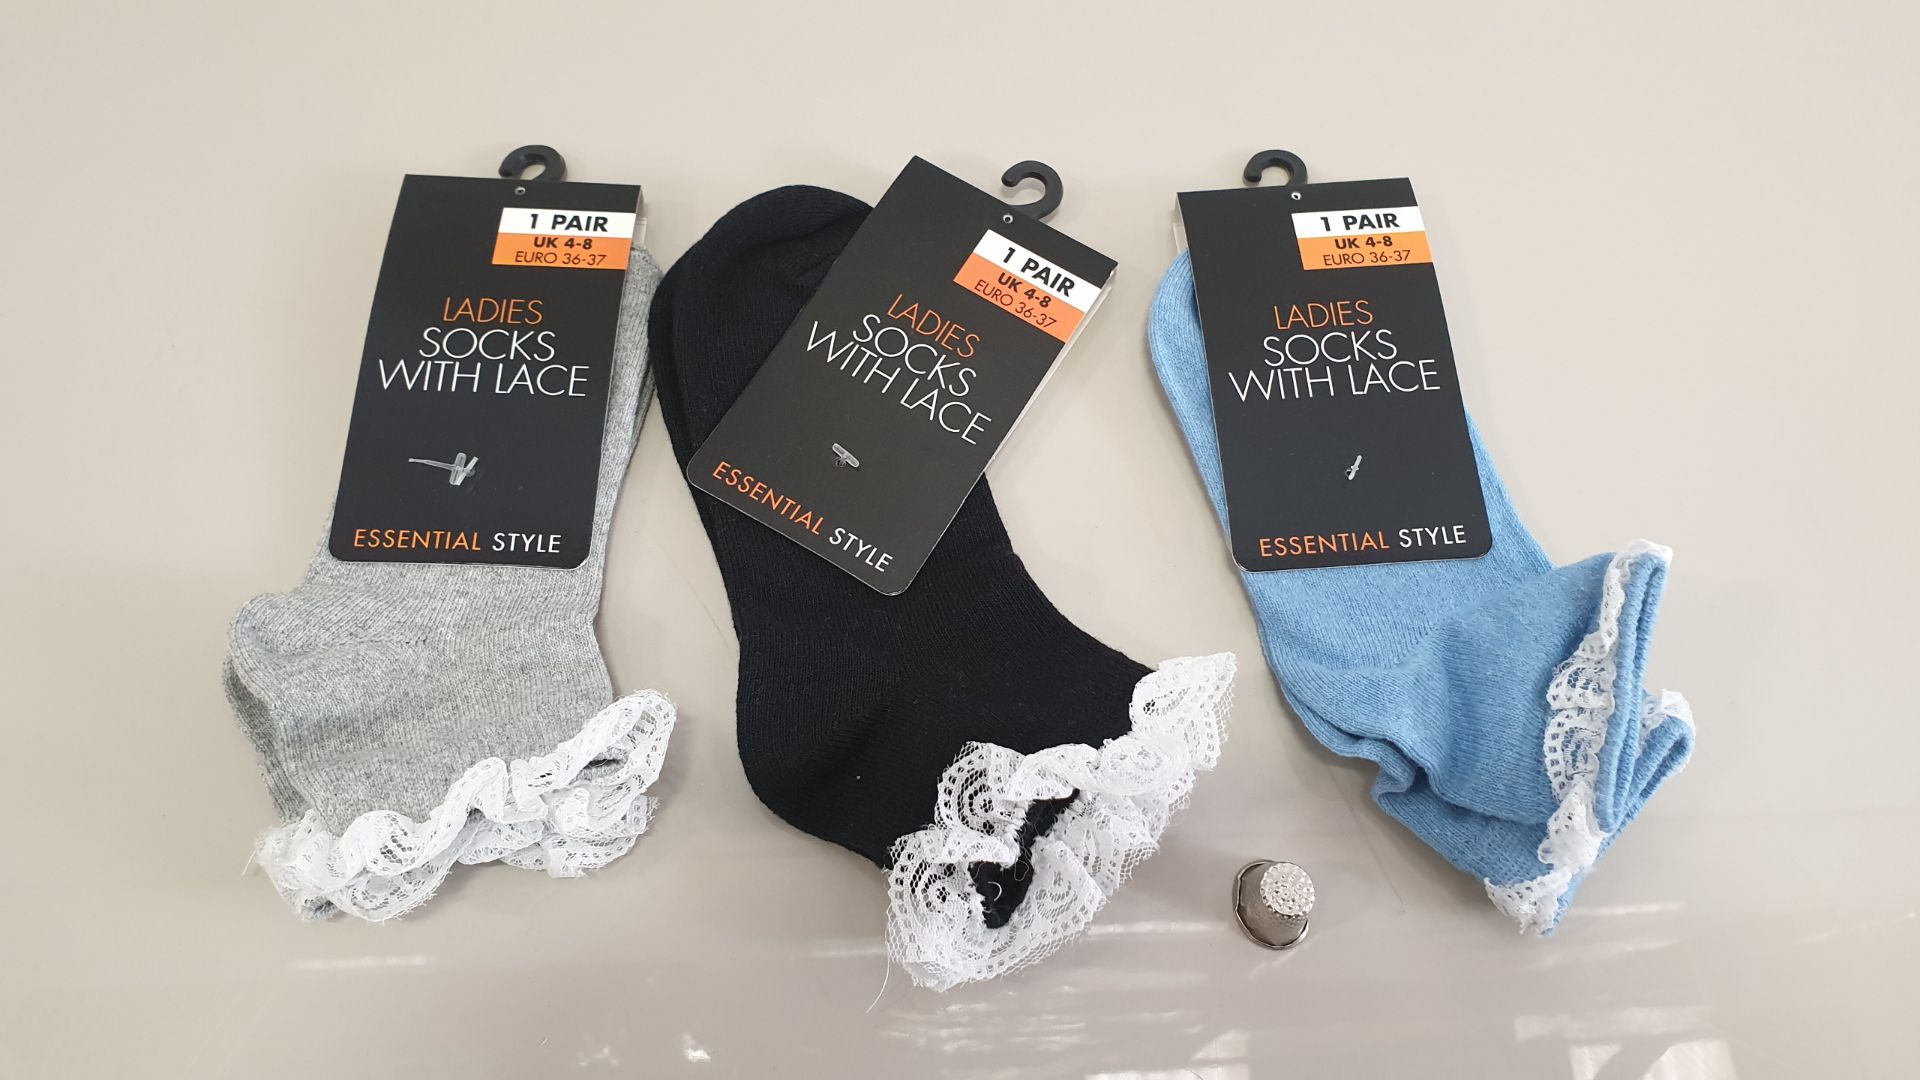 72 PAIRS OF LADIES SOCKS WITH LACE - BLACK, GREY, BLUE (SIZE UK 4-8) - IN 3 BOXES